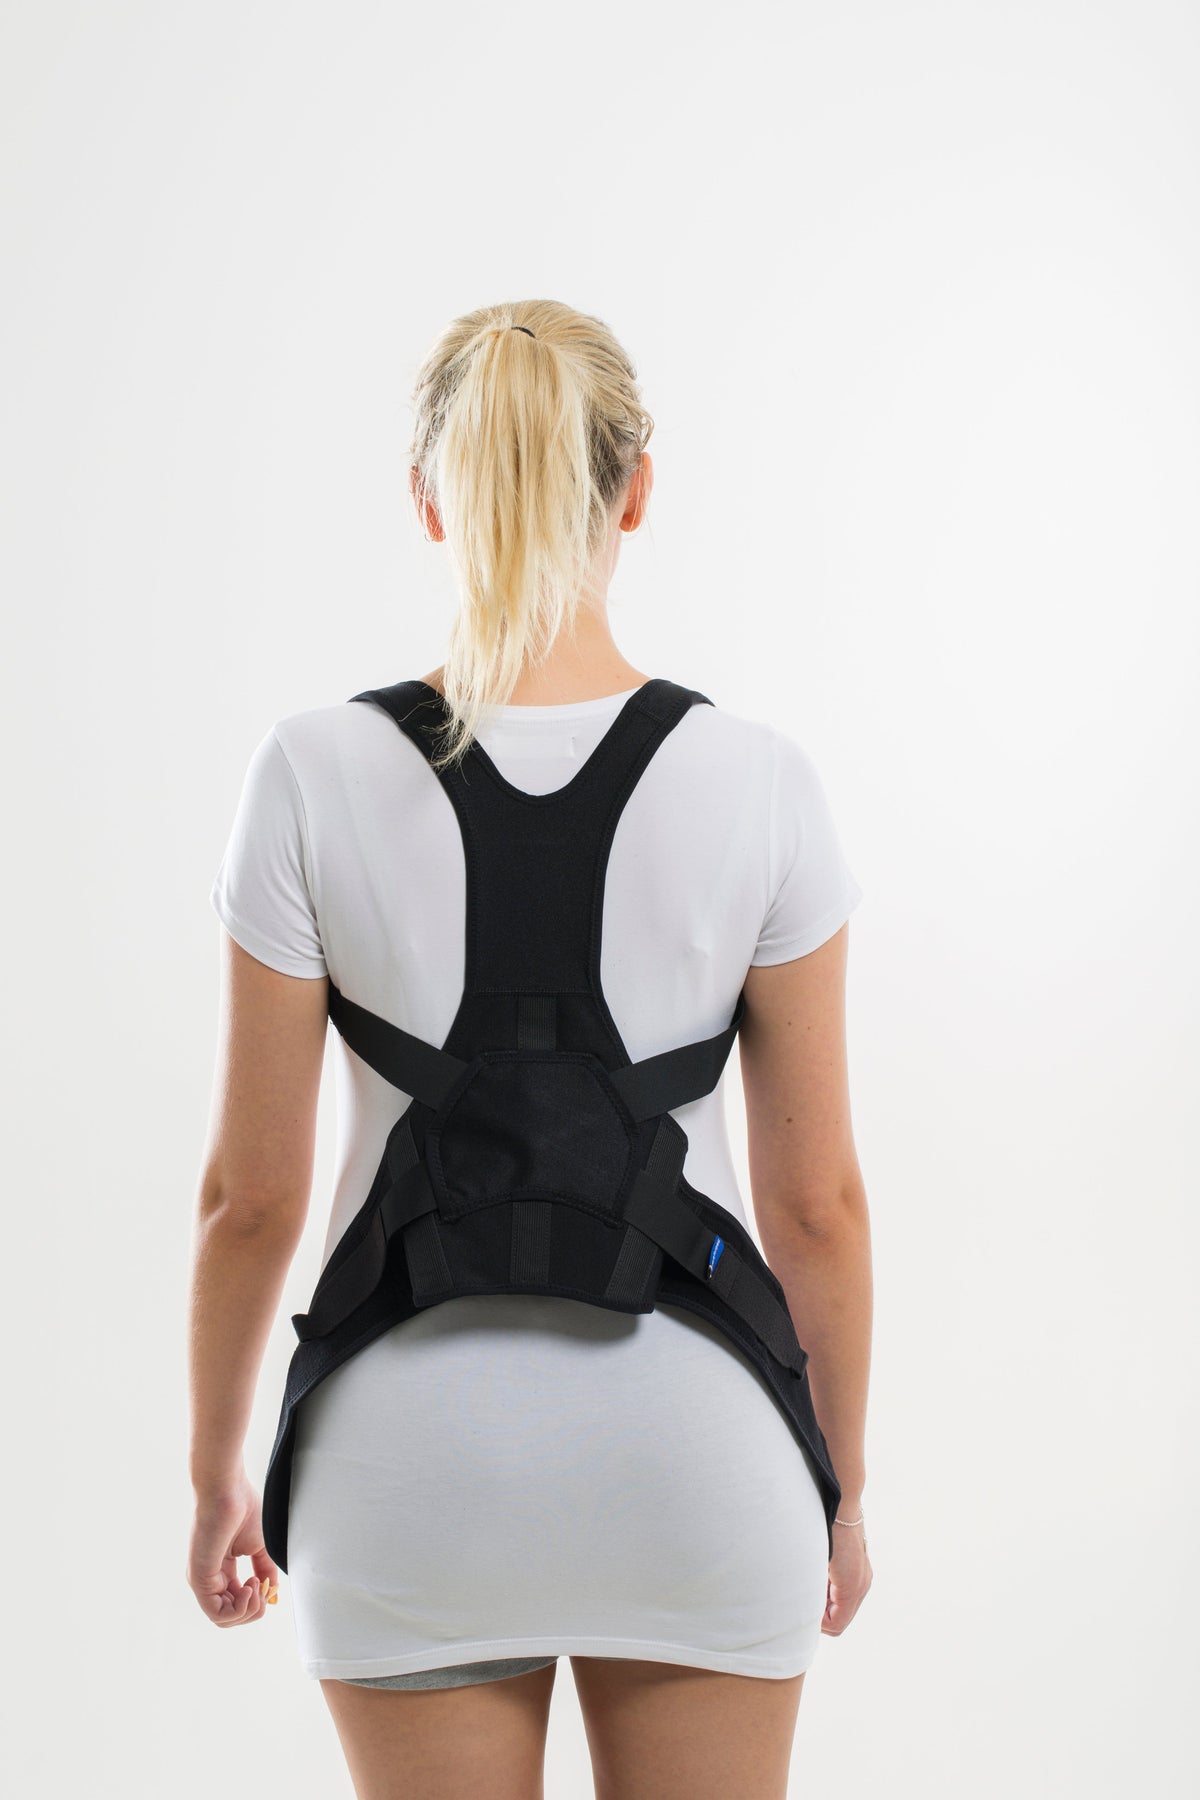 EXTO LIGHT POSTURAL SUPPORT